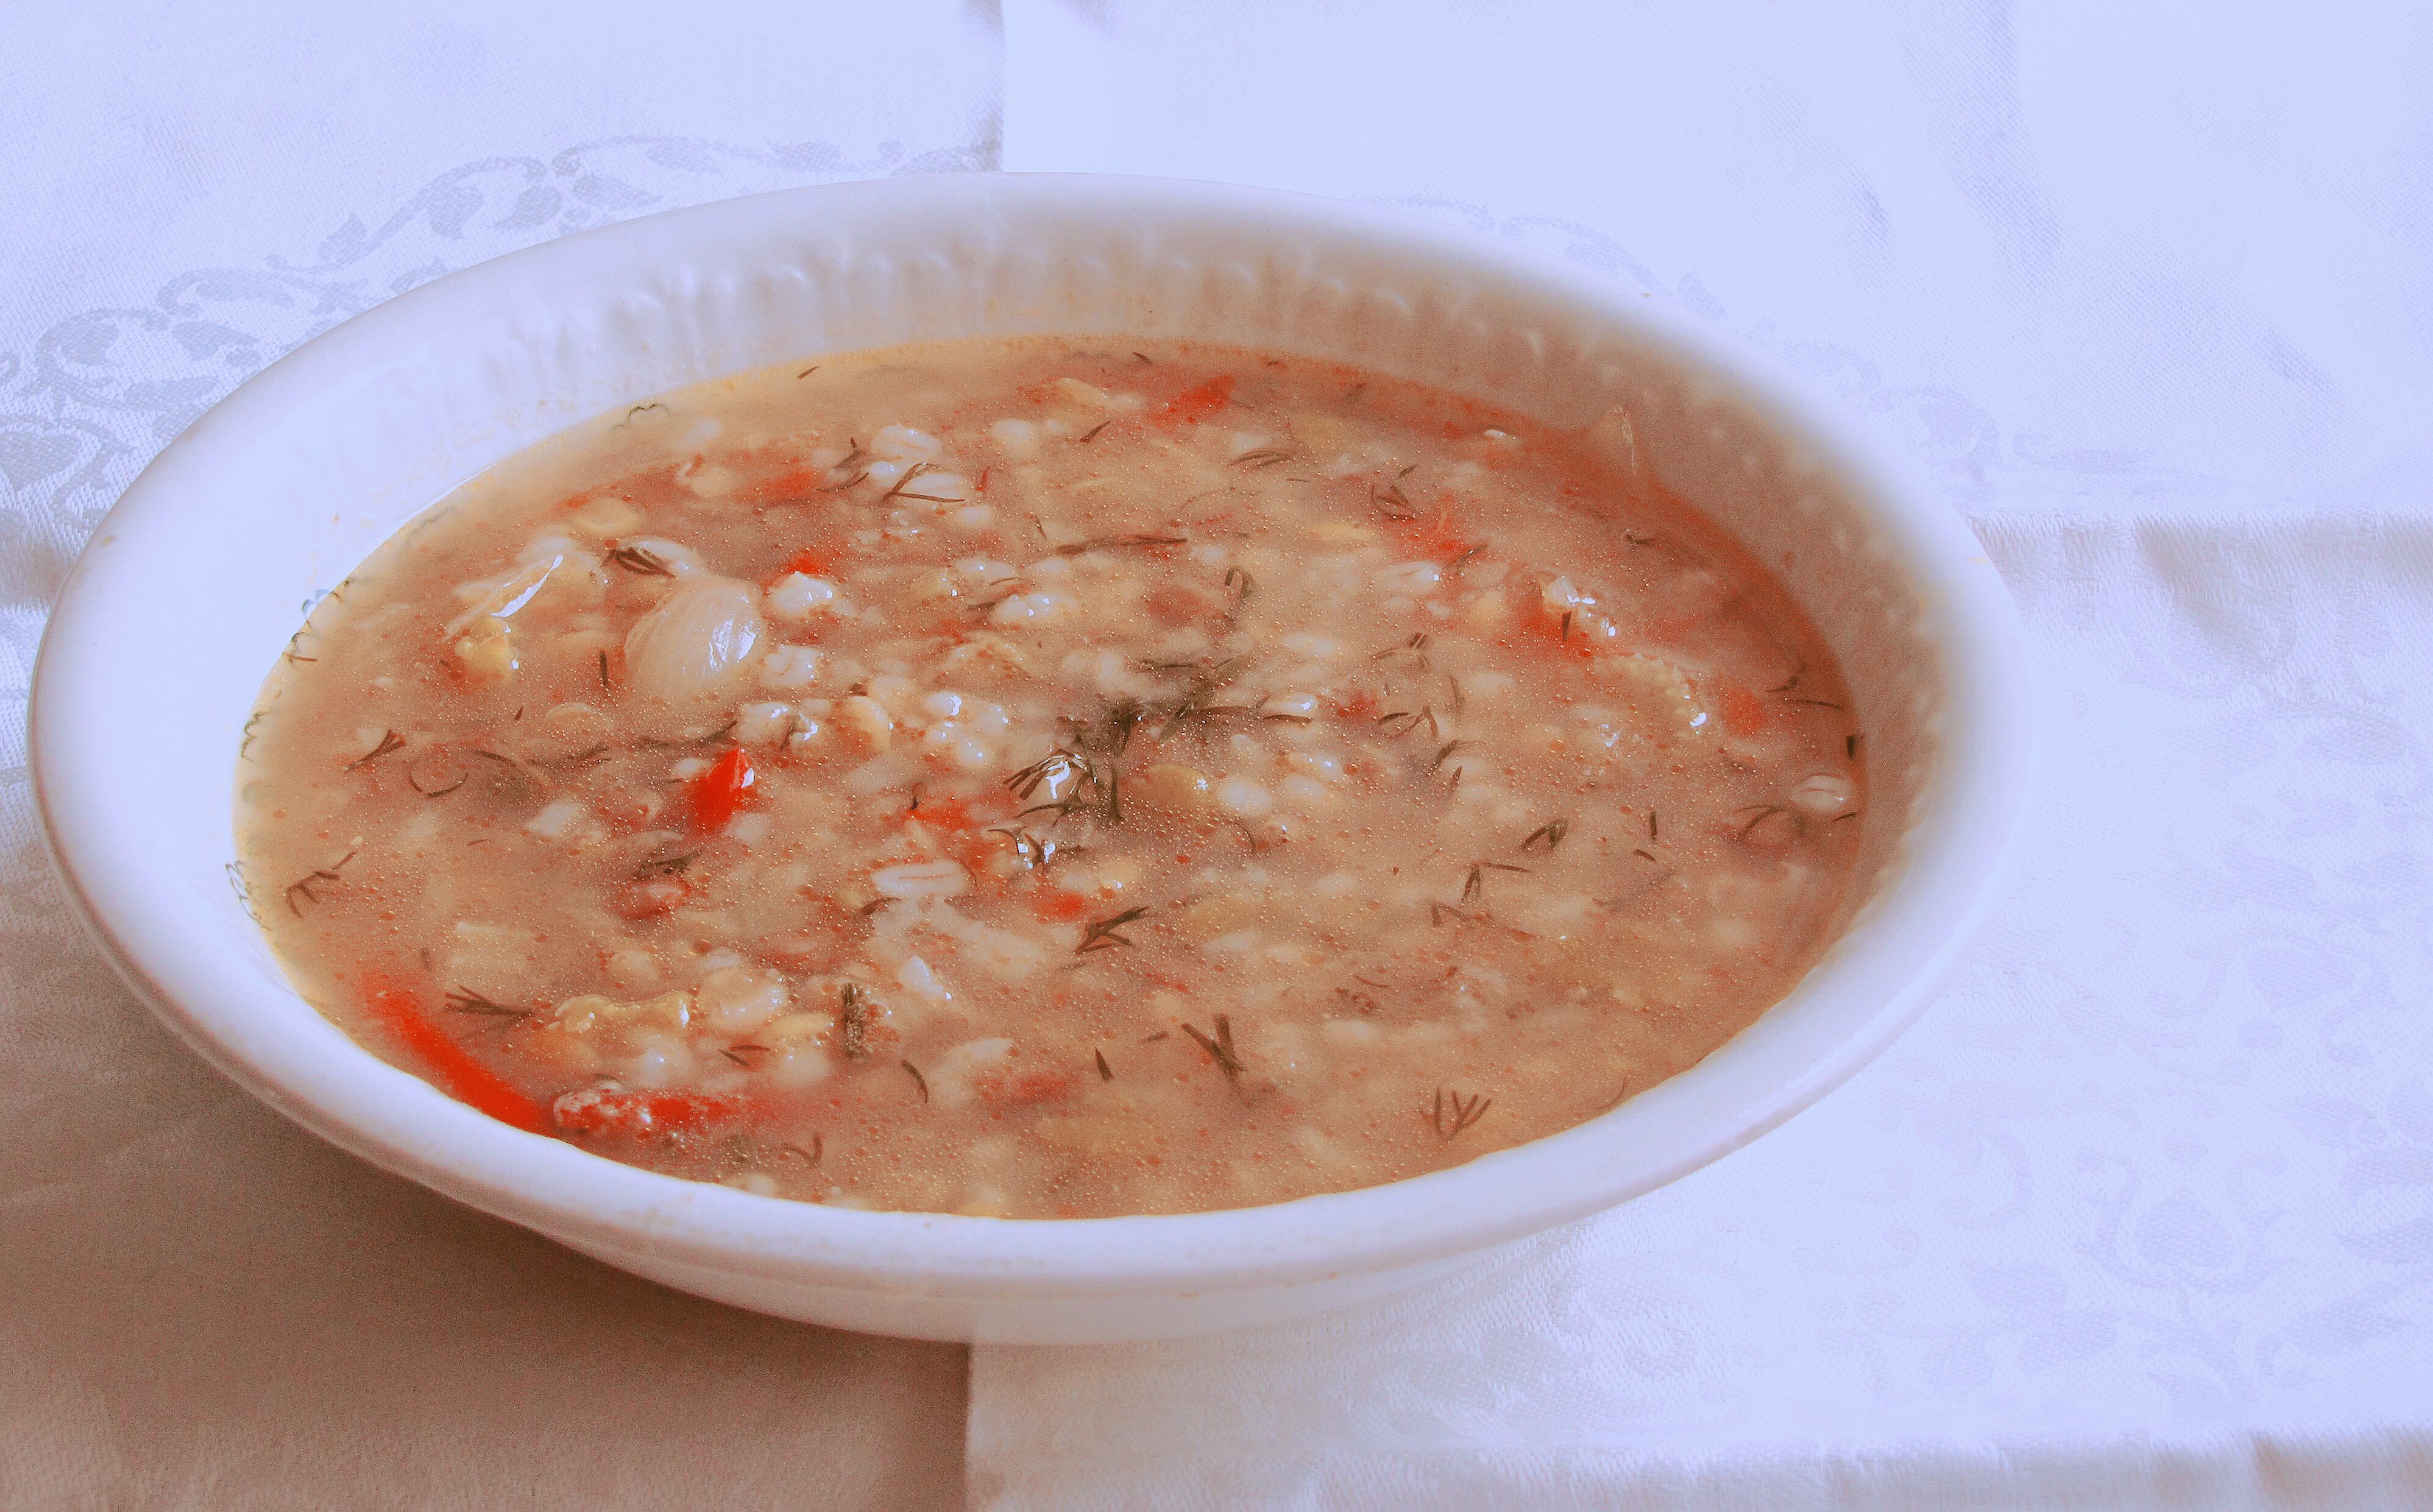 Bean soup with rice